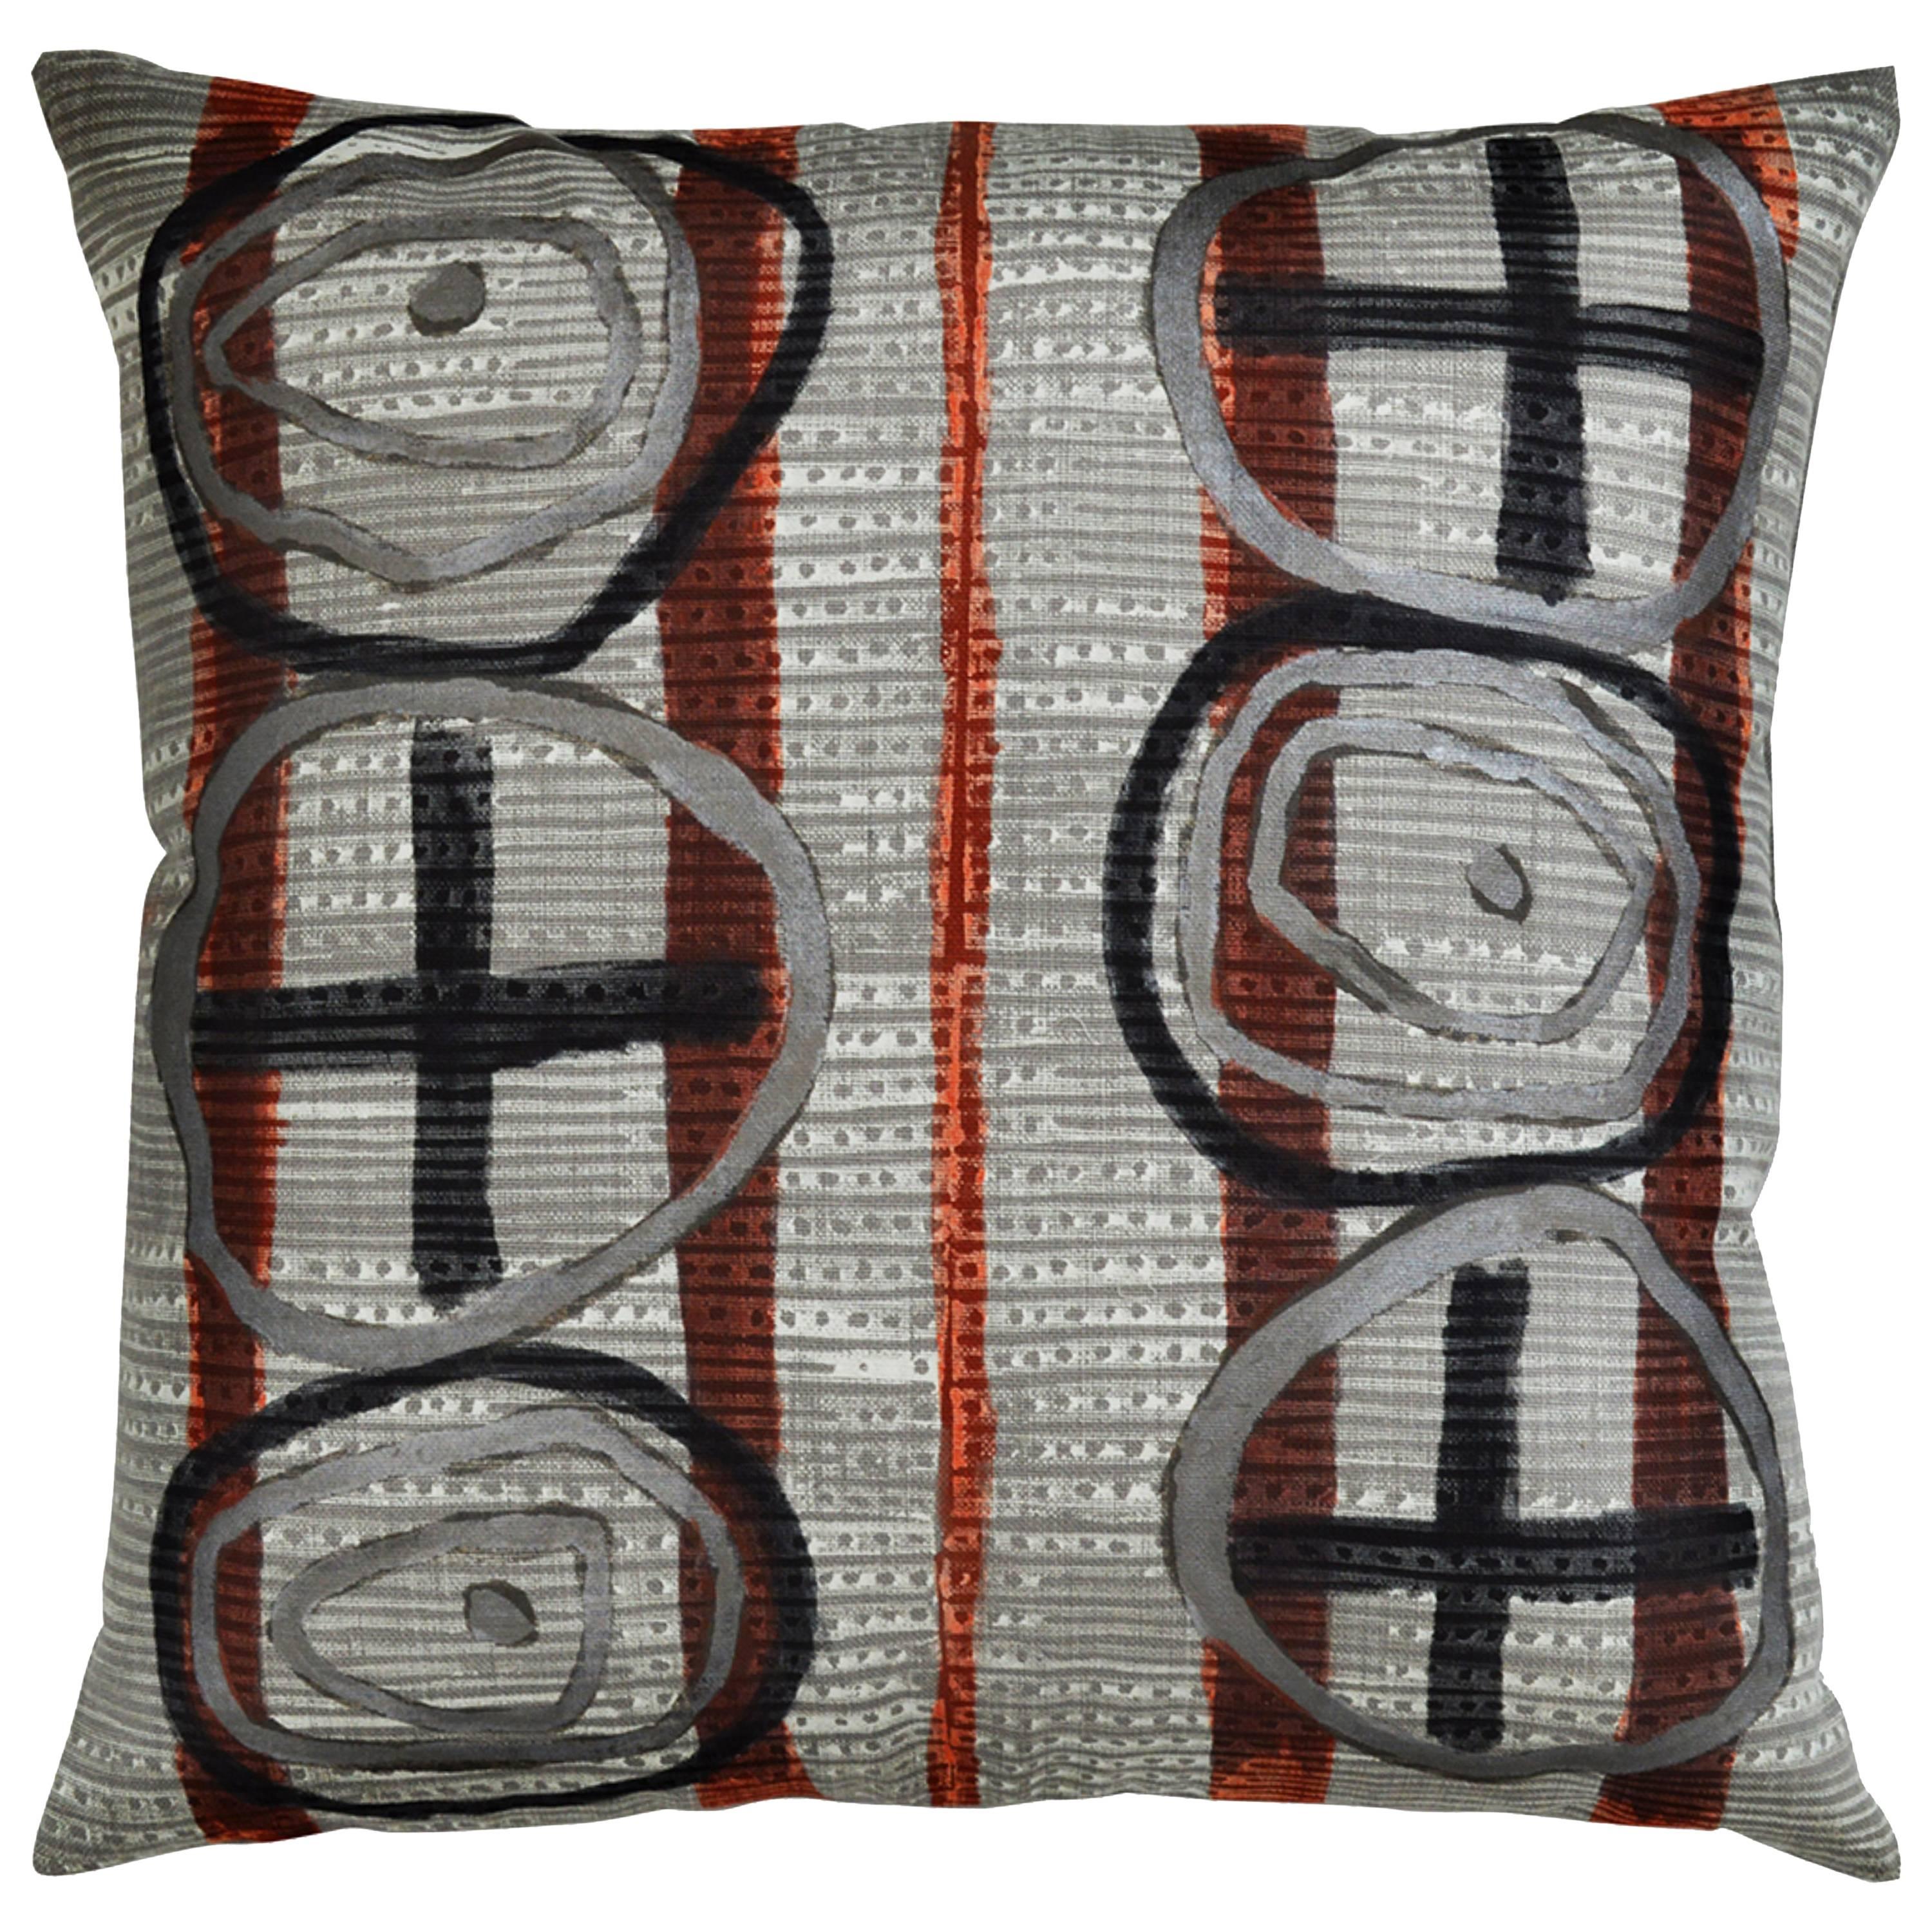 Overlayed Signs, Contemporary One-of-a-Kind Multicolored Handmade Linen Pillow For Sale